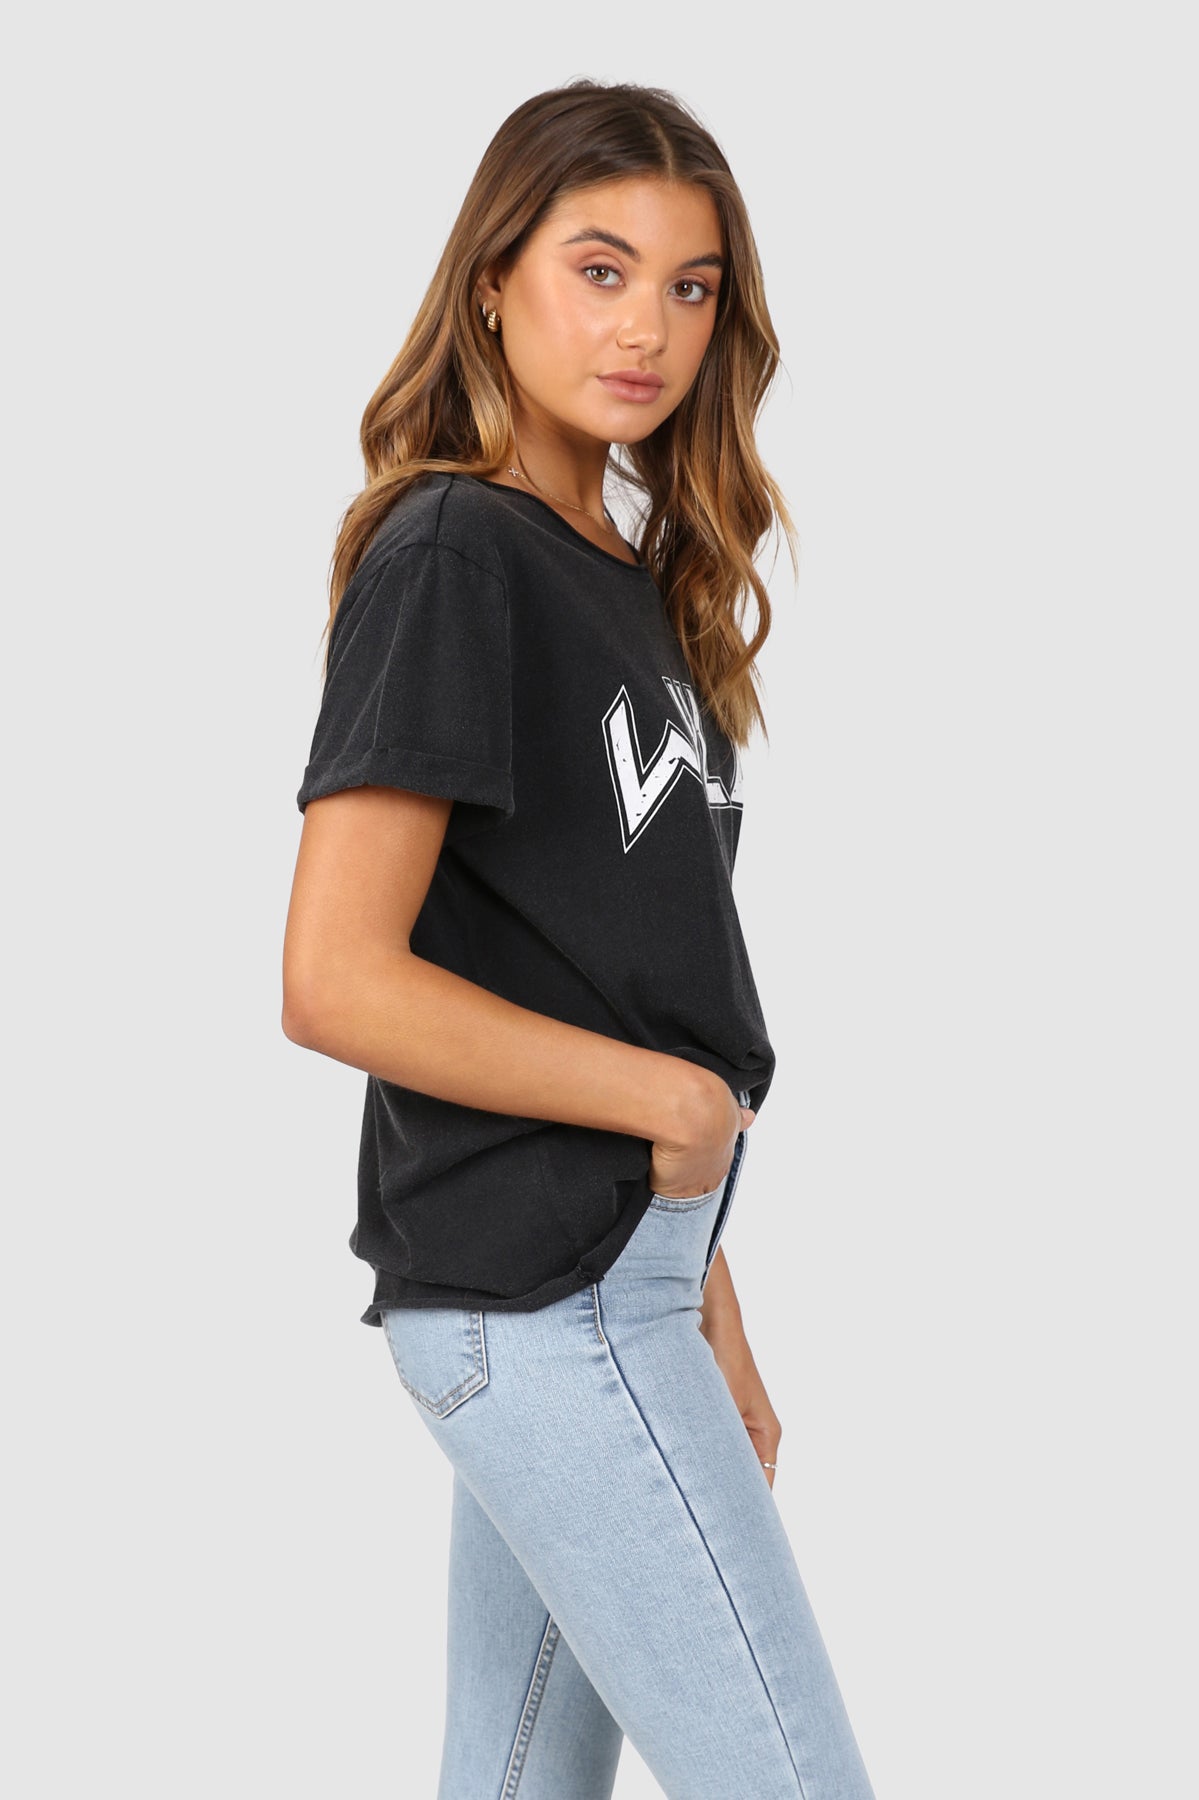 Bailage Caucasian Female wearing Vintage Casual Basic WILD Graphic Tee Short Sleeved T-Shirt Relaxed Fit Round Neck paired with high waisted light washed denim jeans and white sneakers